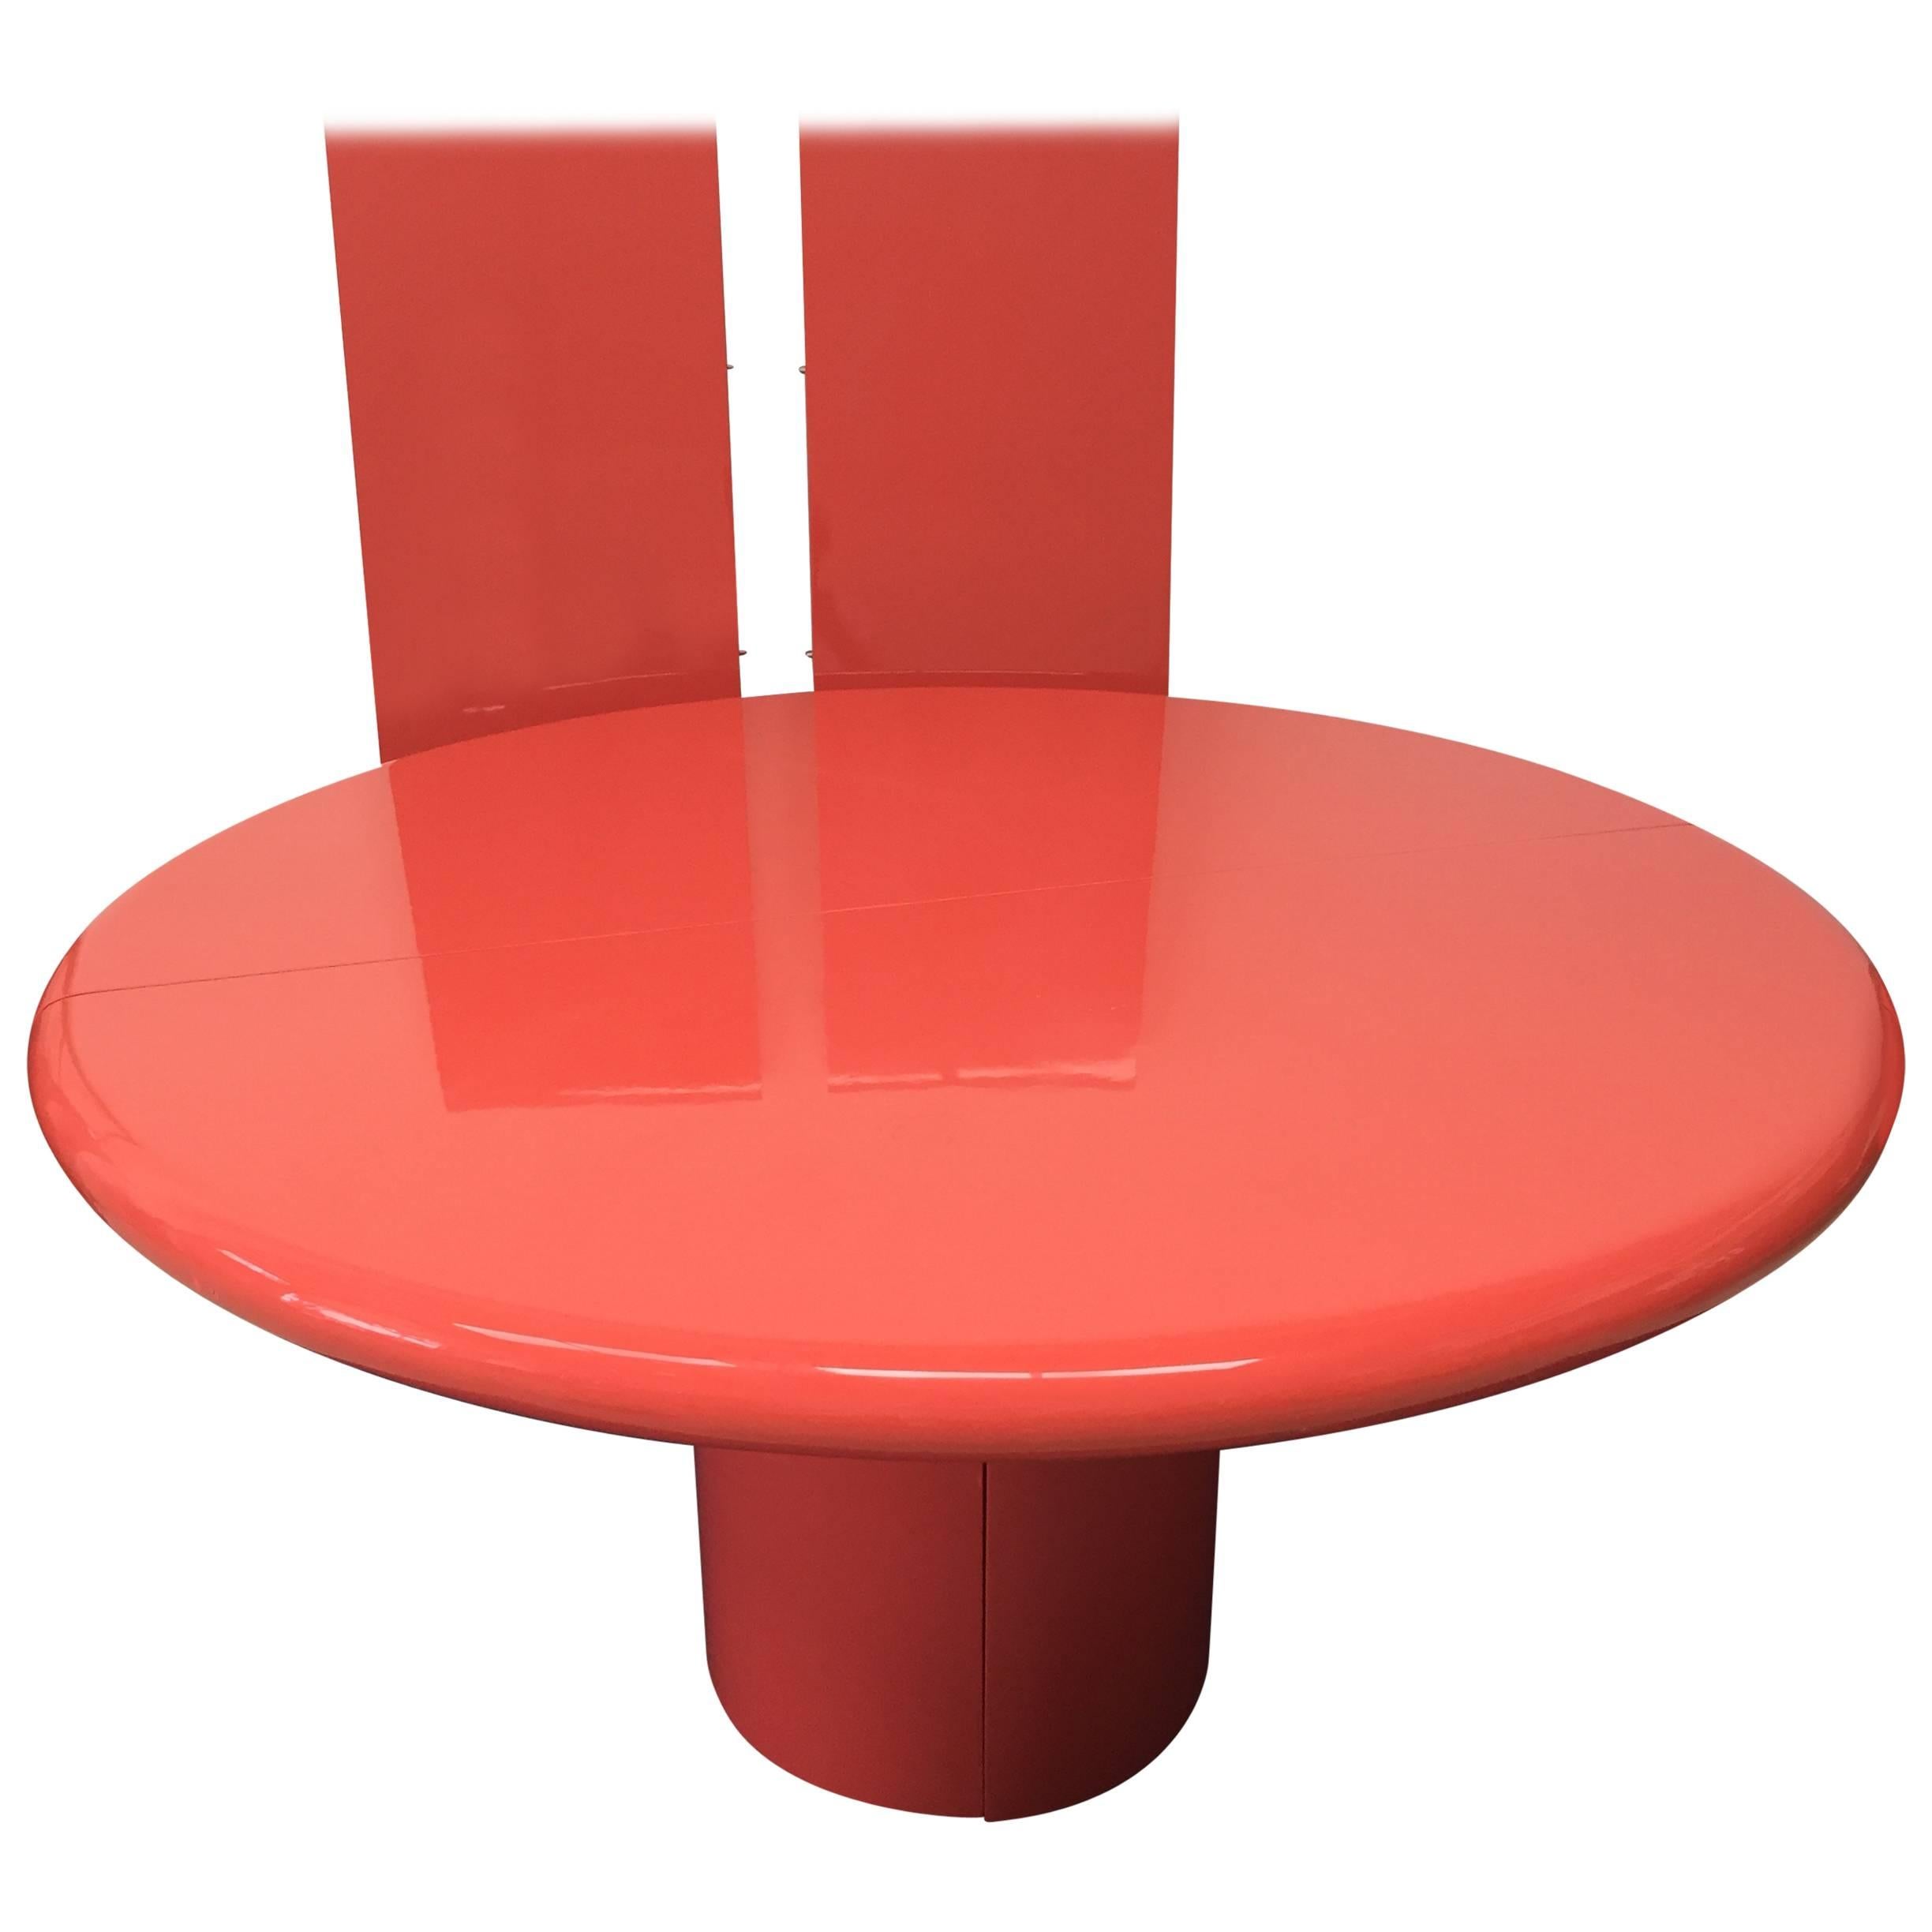 Goatskin Round Dining Table in Coral